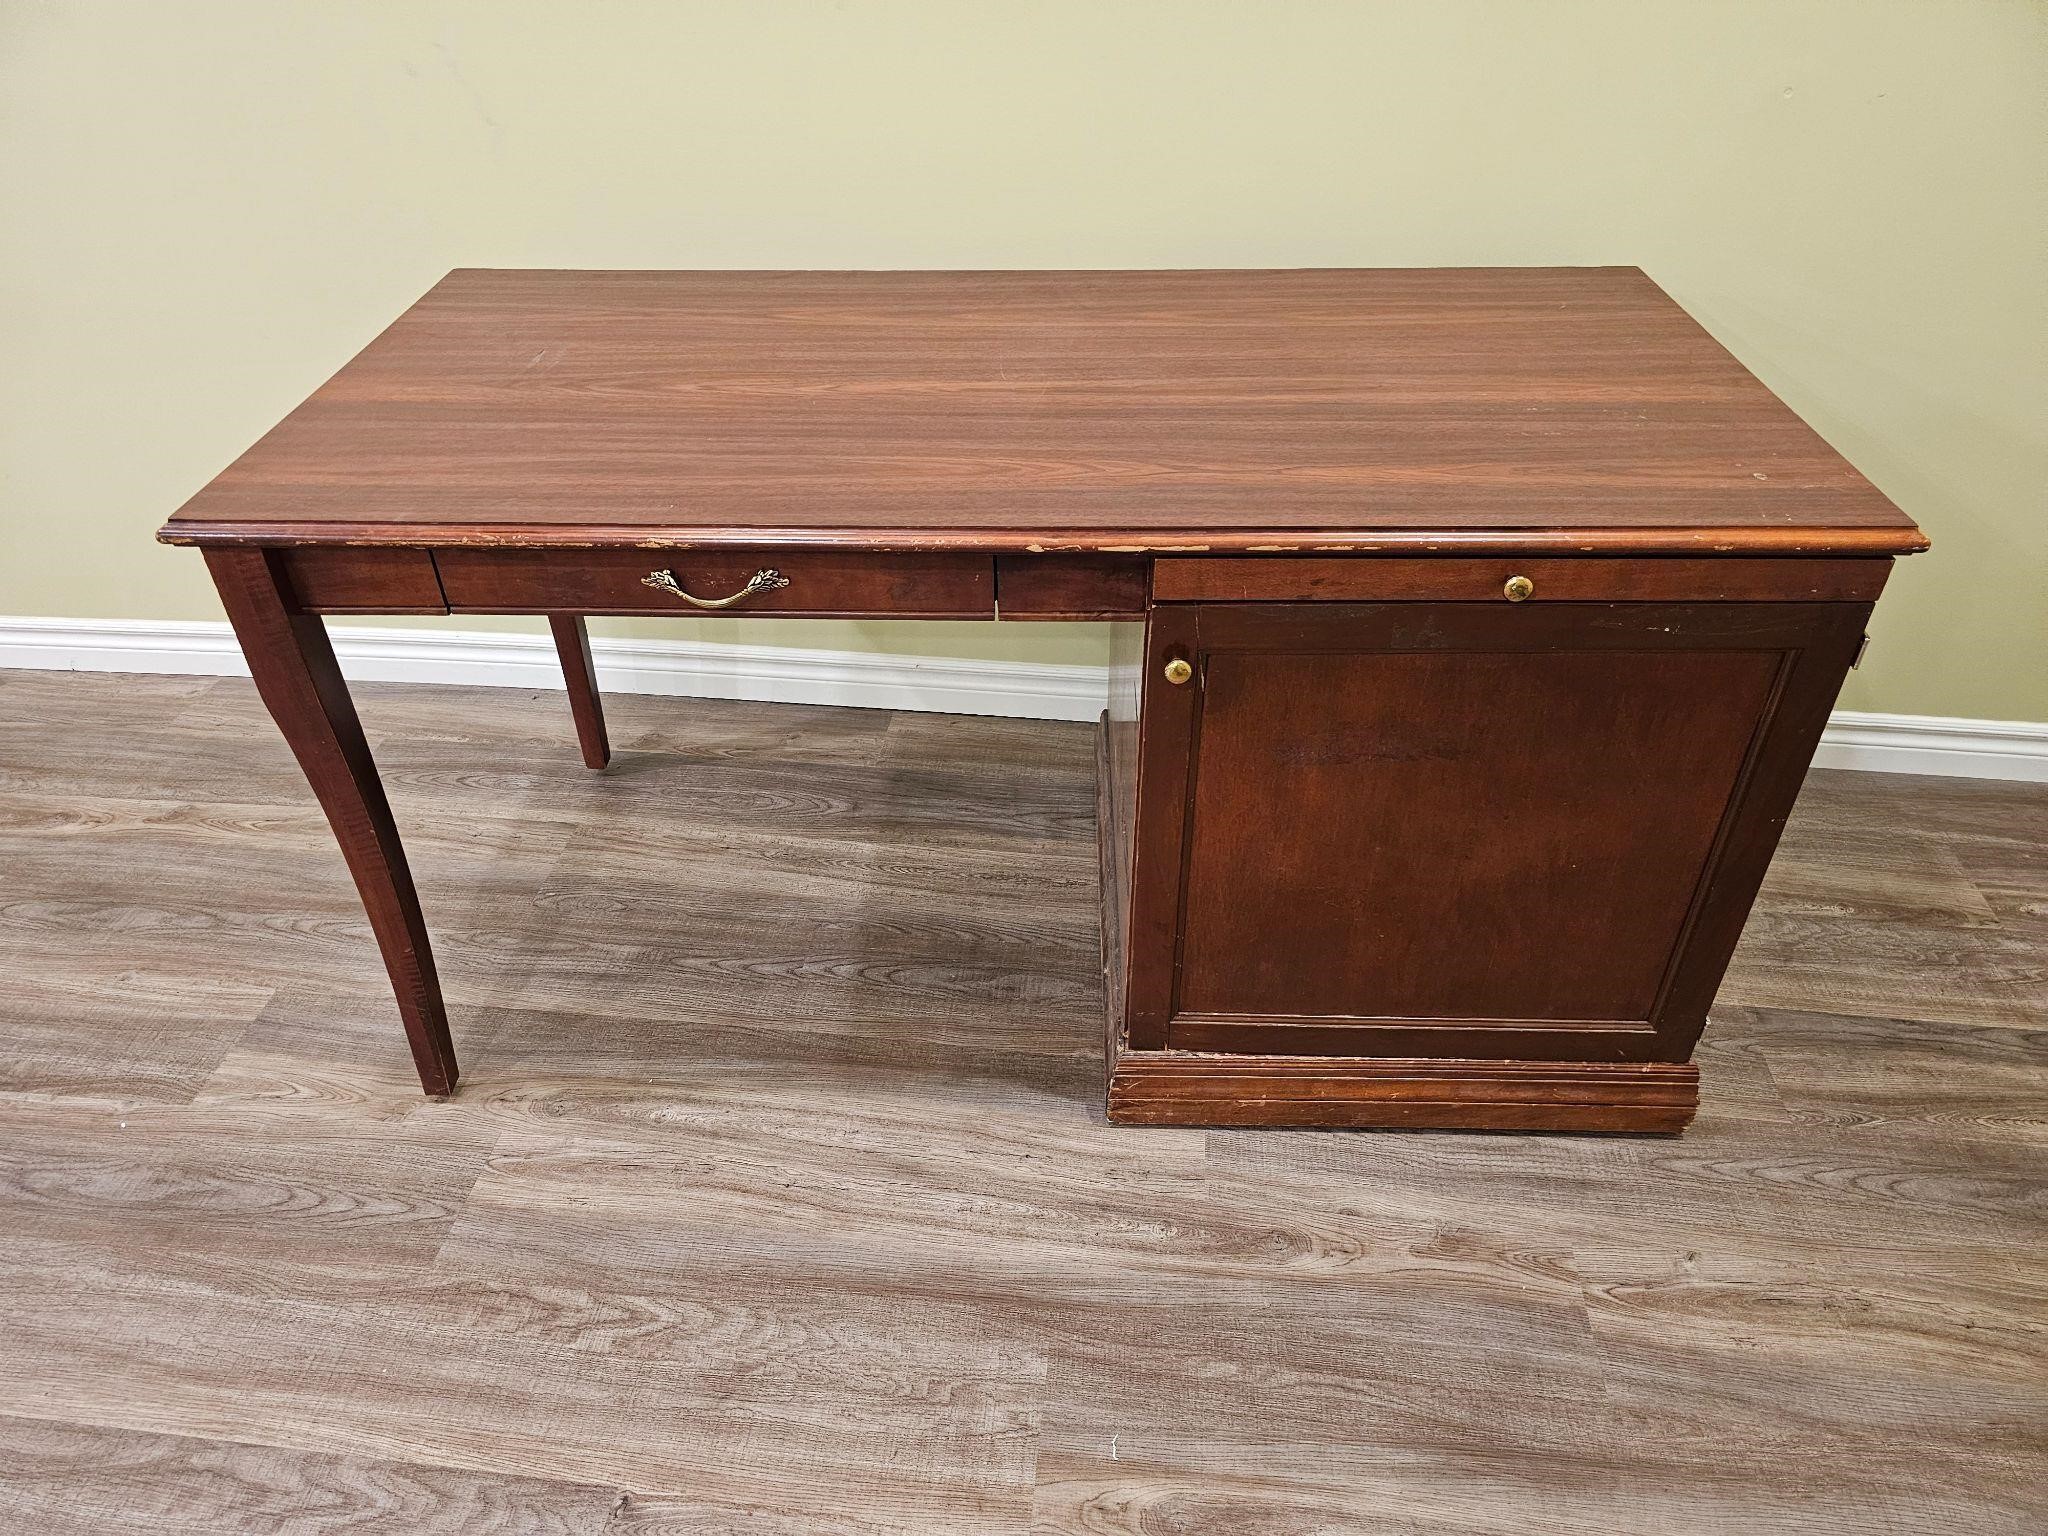 ($359) Wooden Desk with Drawer and Door